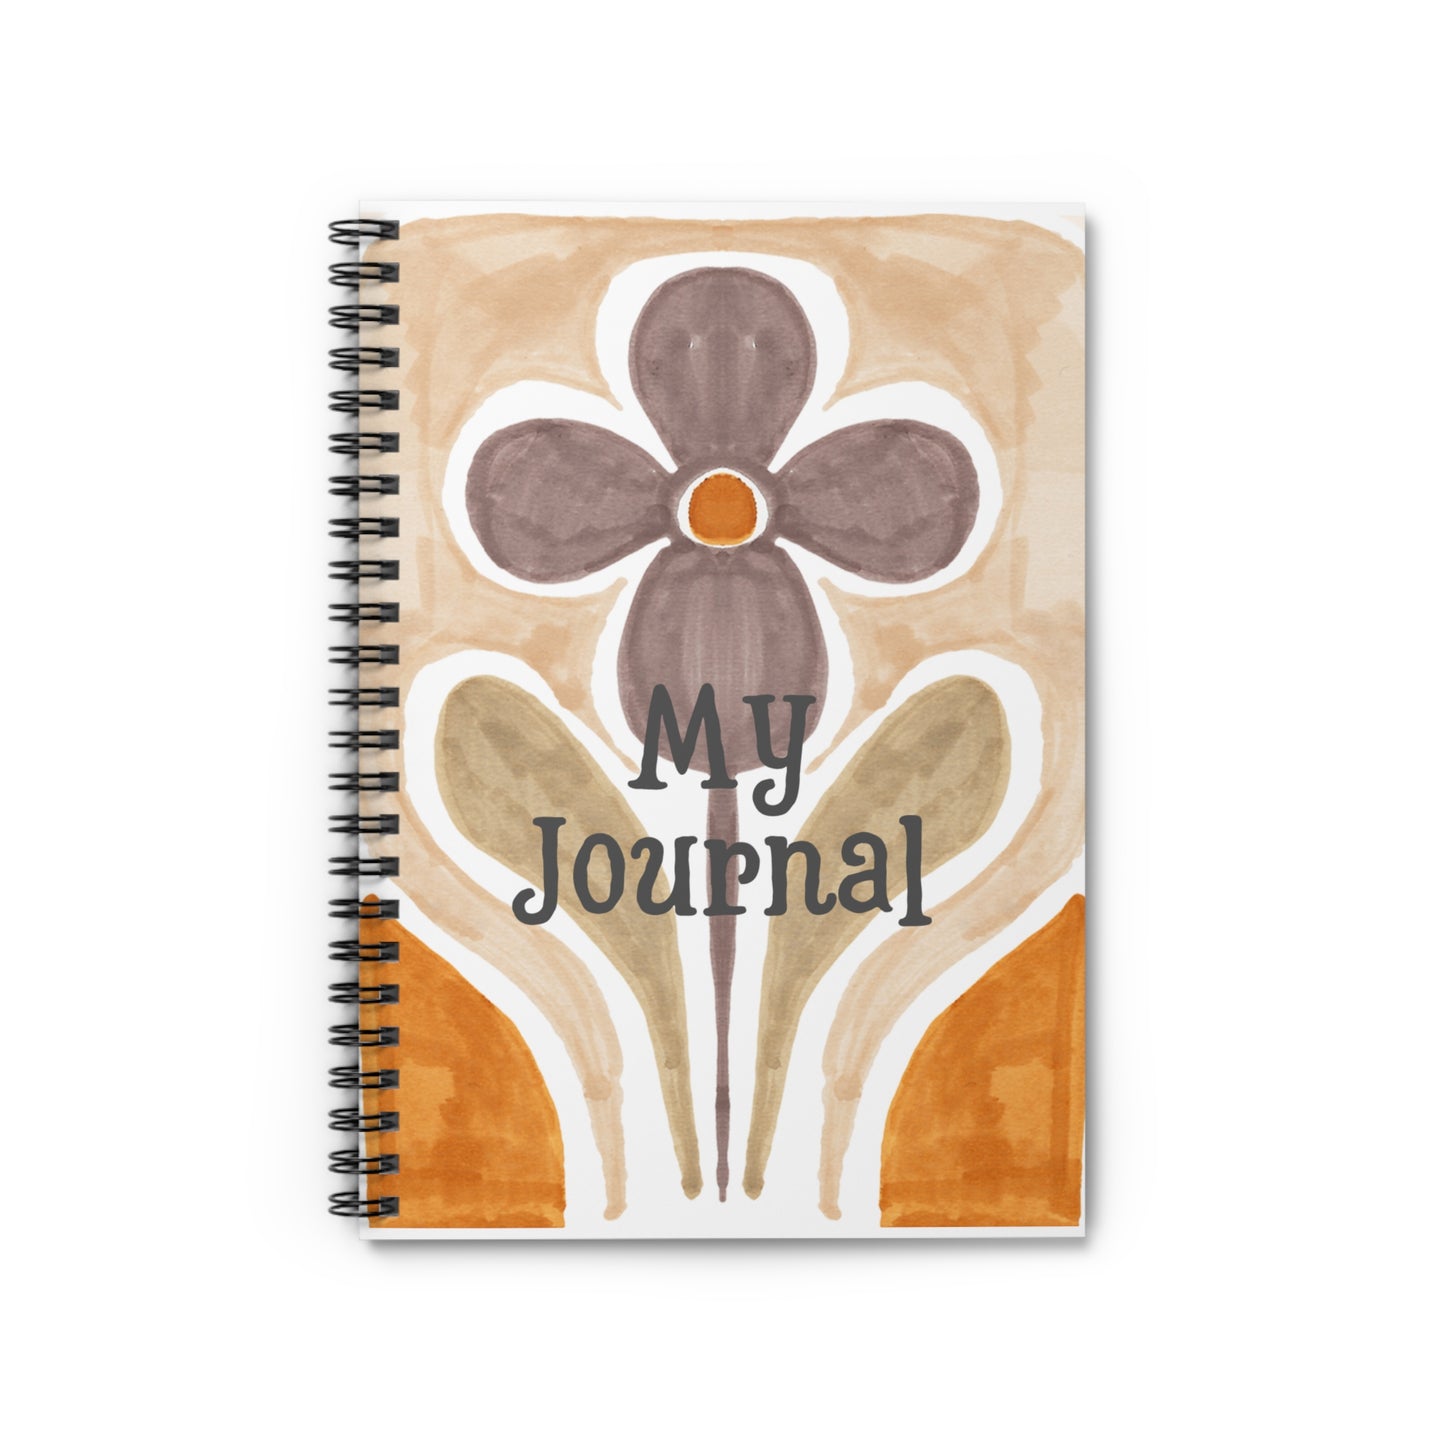 Water Color Flower Design Spiral Notebook - Ruled Line Paper products Krazy Heart Designs Boutique One Size  